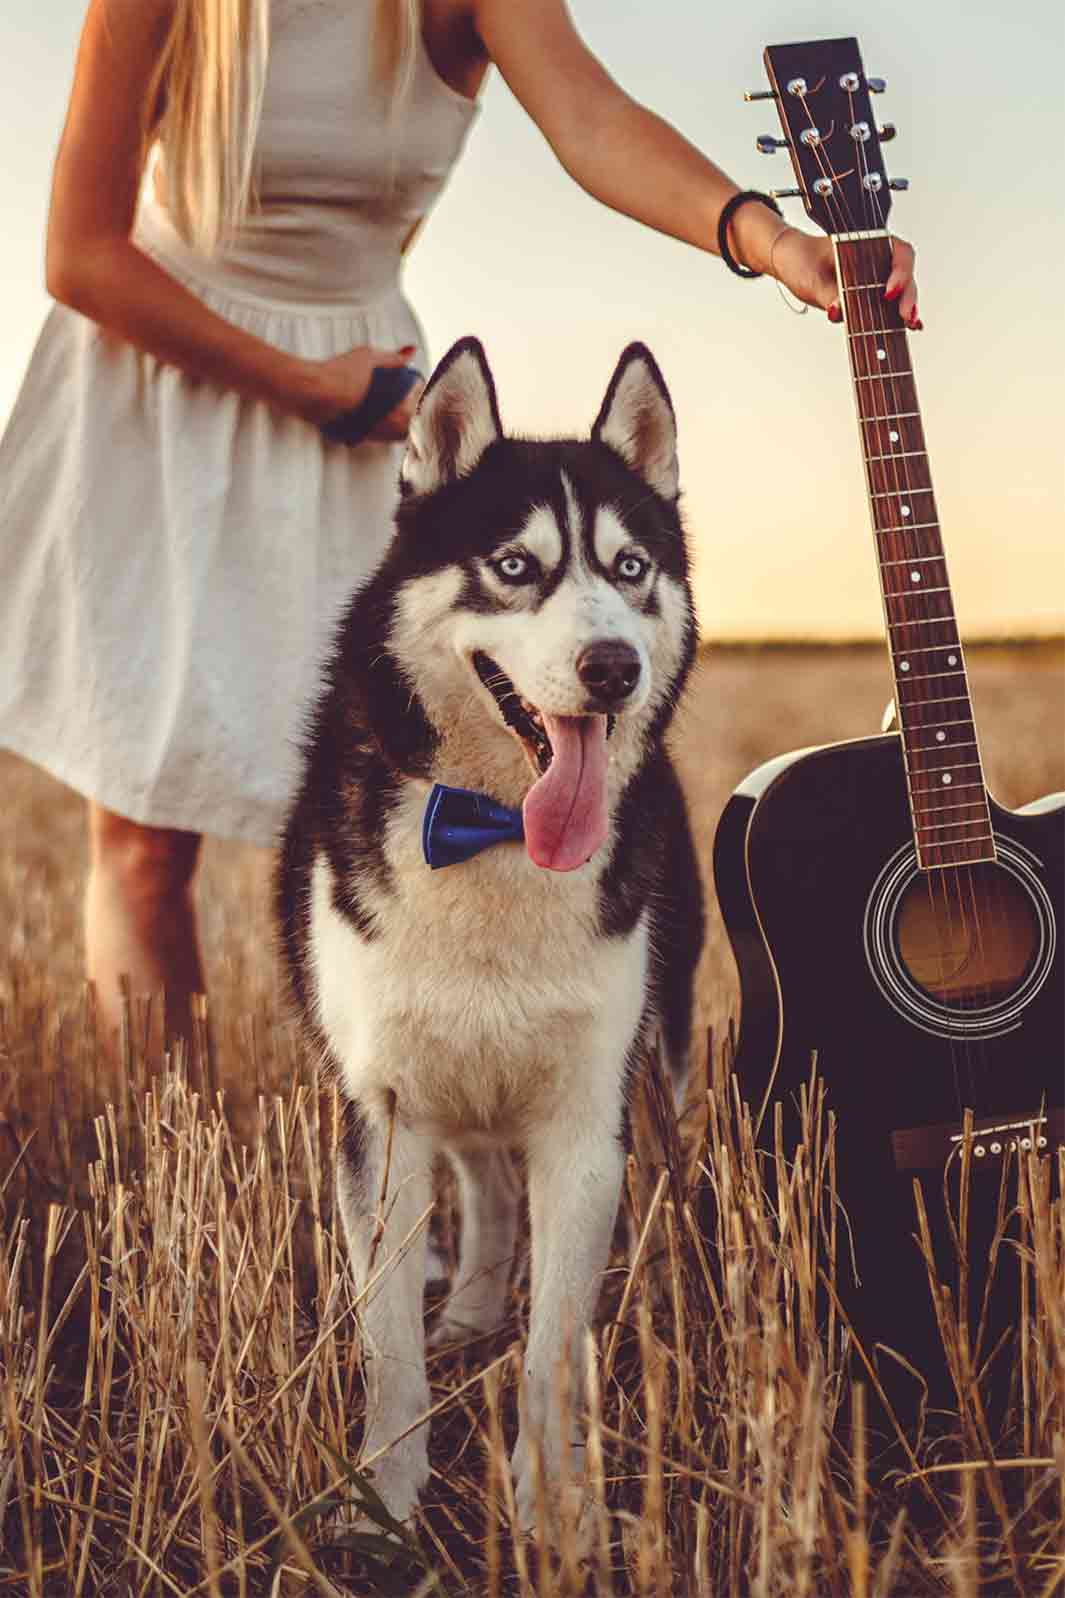 Adorable husky with tongue out next to a guitar. Do dogs like music?